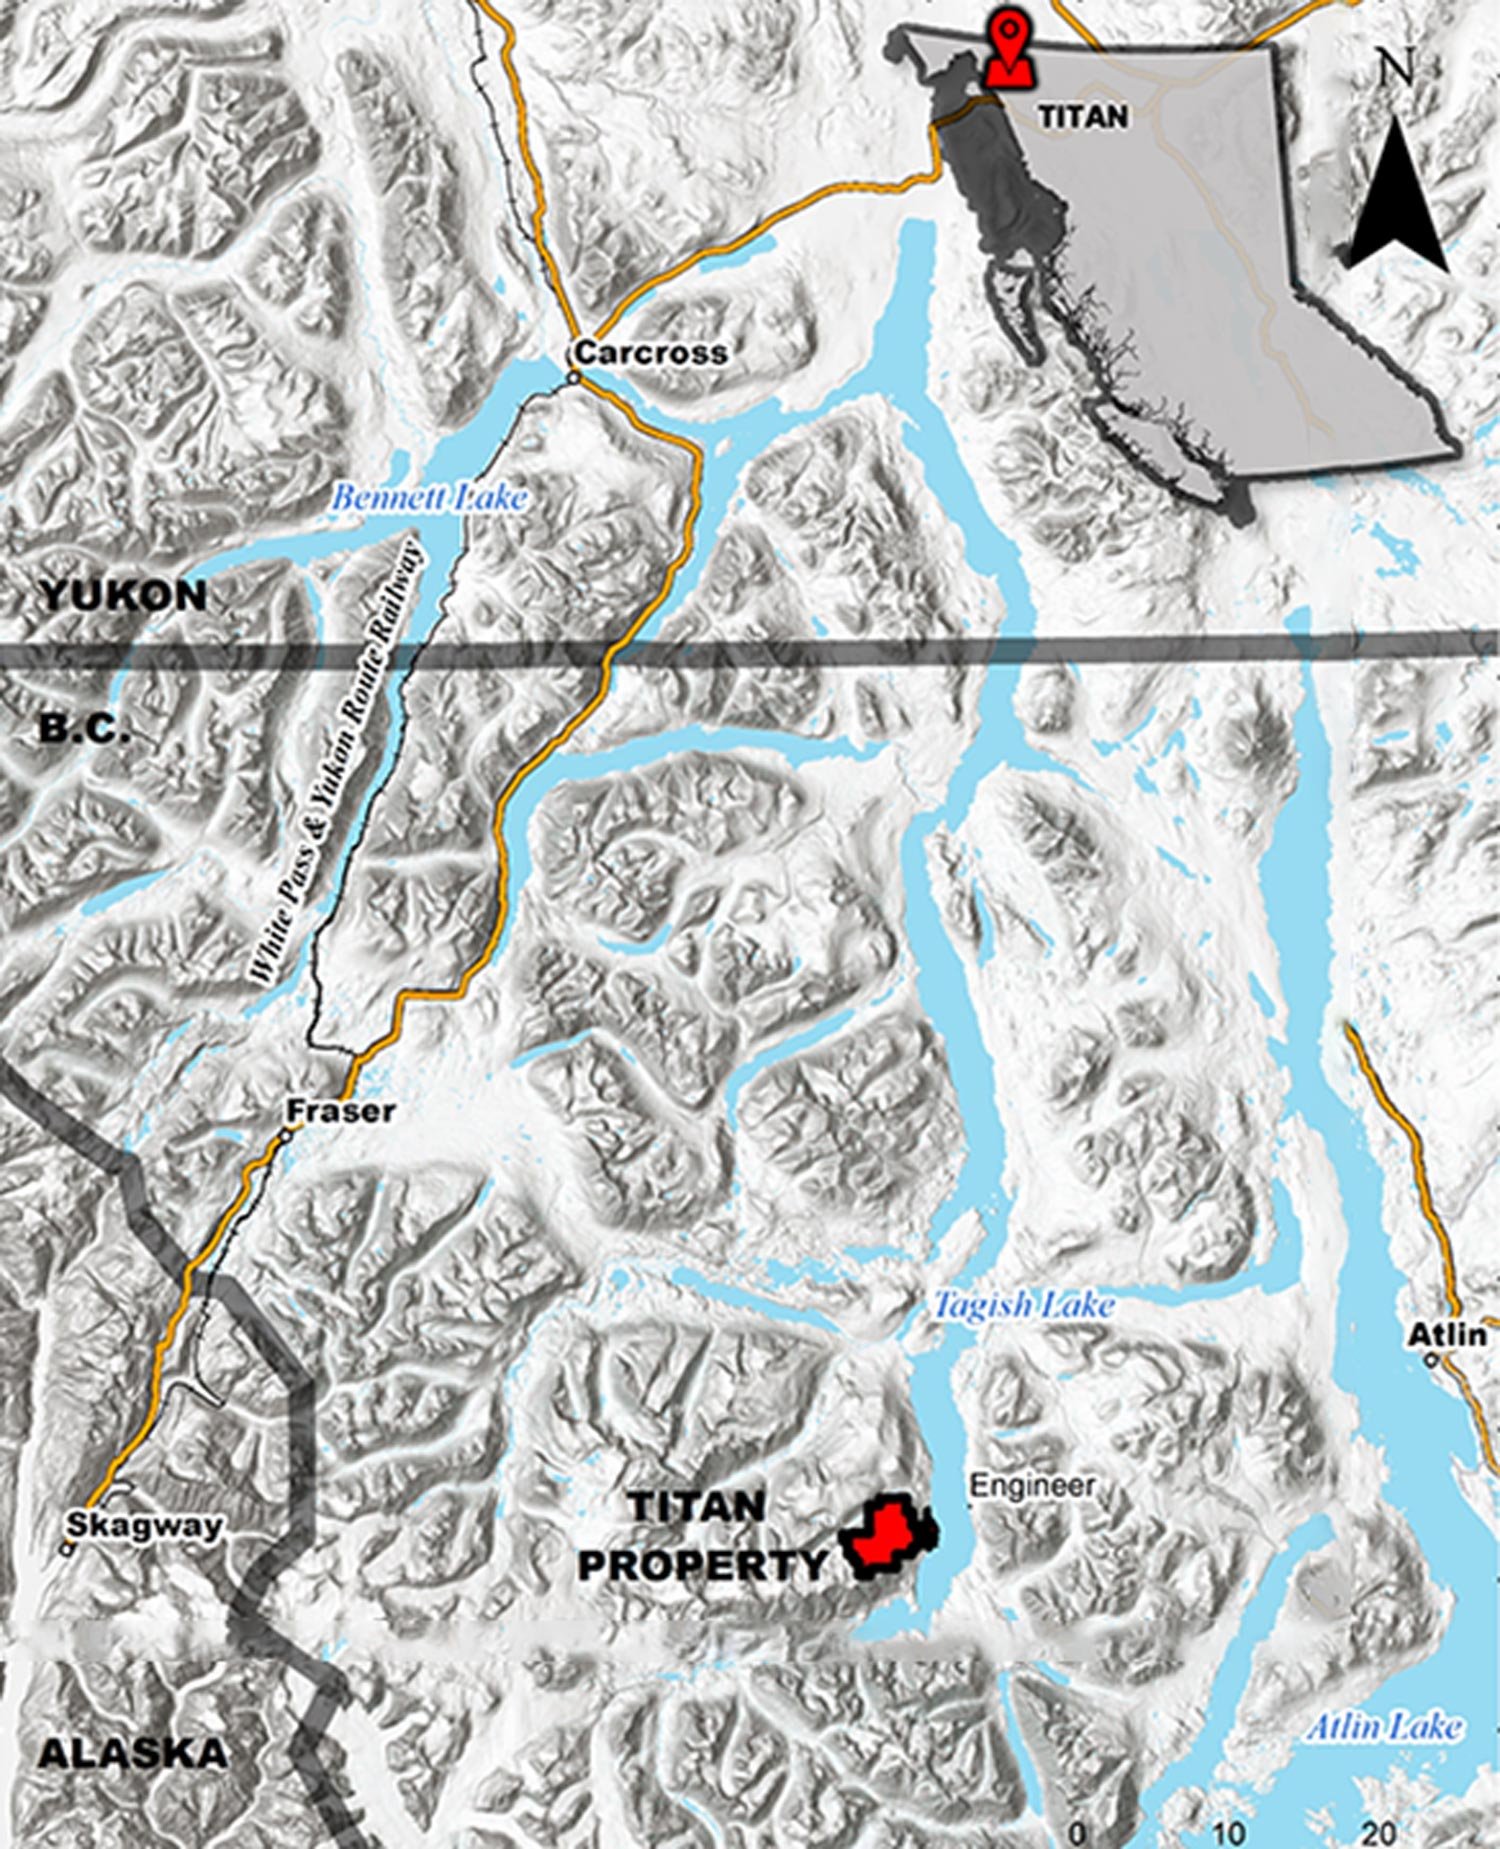 Location Map of the Titan Property